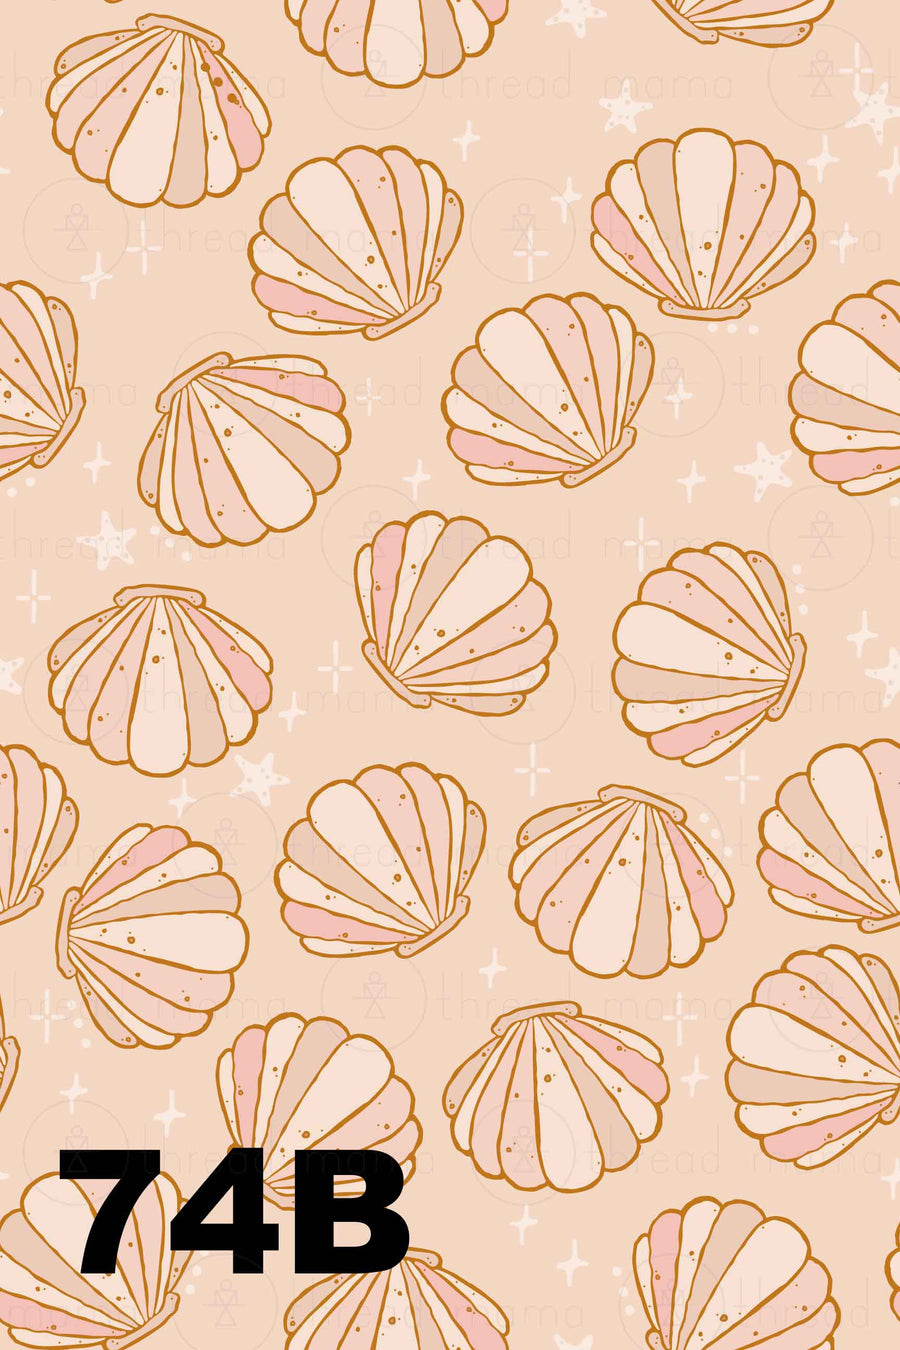 Background Pattern #74 Collection (Printable Poster)